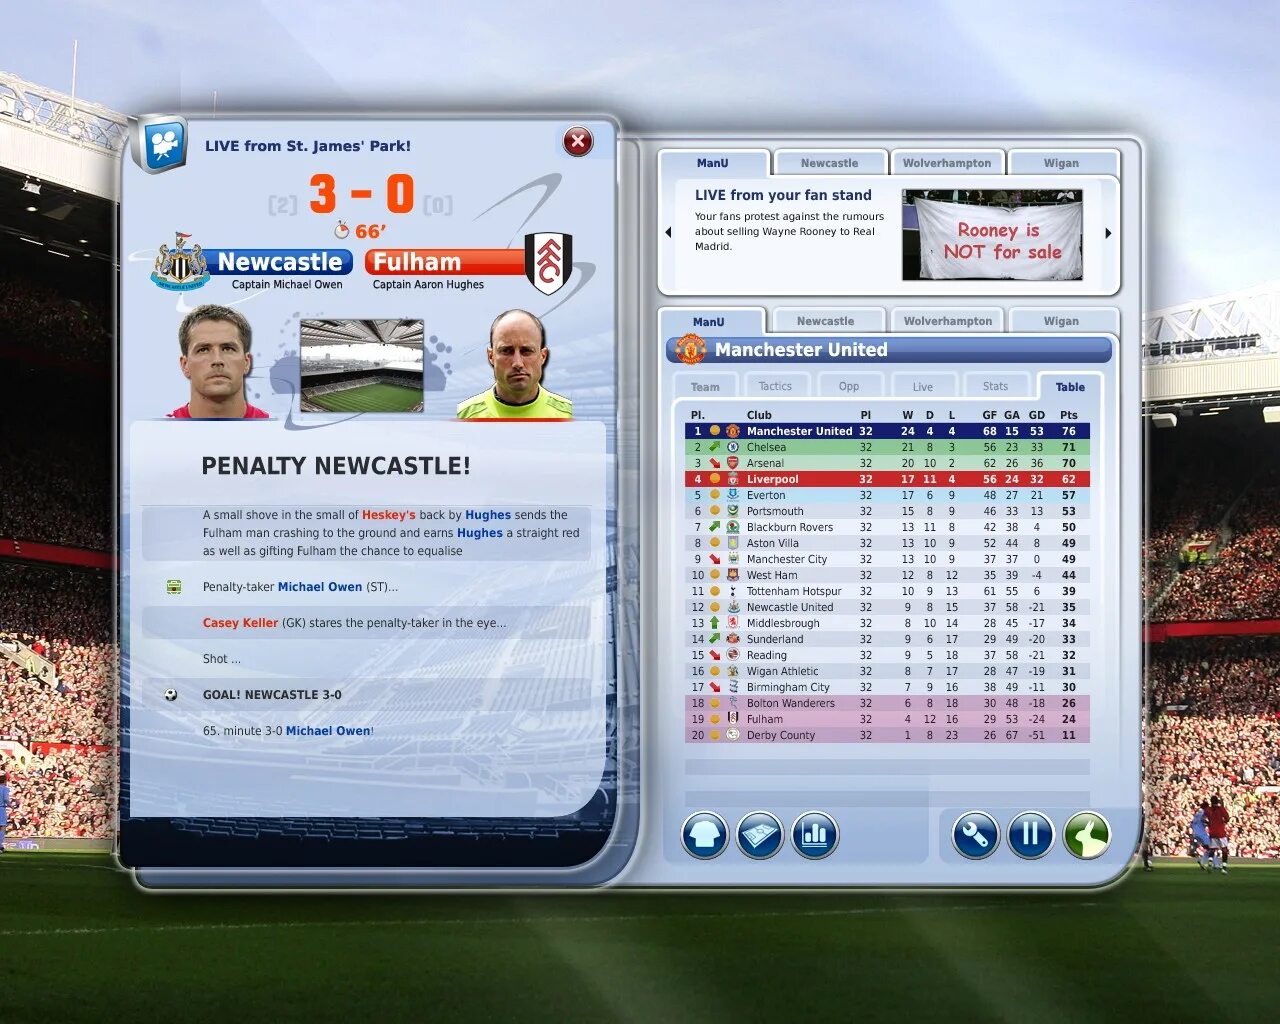 Fifa manager русская. FIFA Manager 2009. Игра ФИФА Манагер. FIFA Manager 09. FIFA Manager 23.